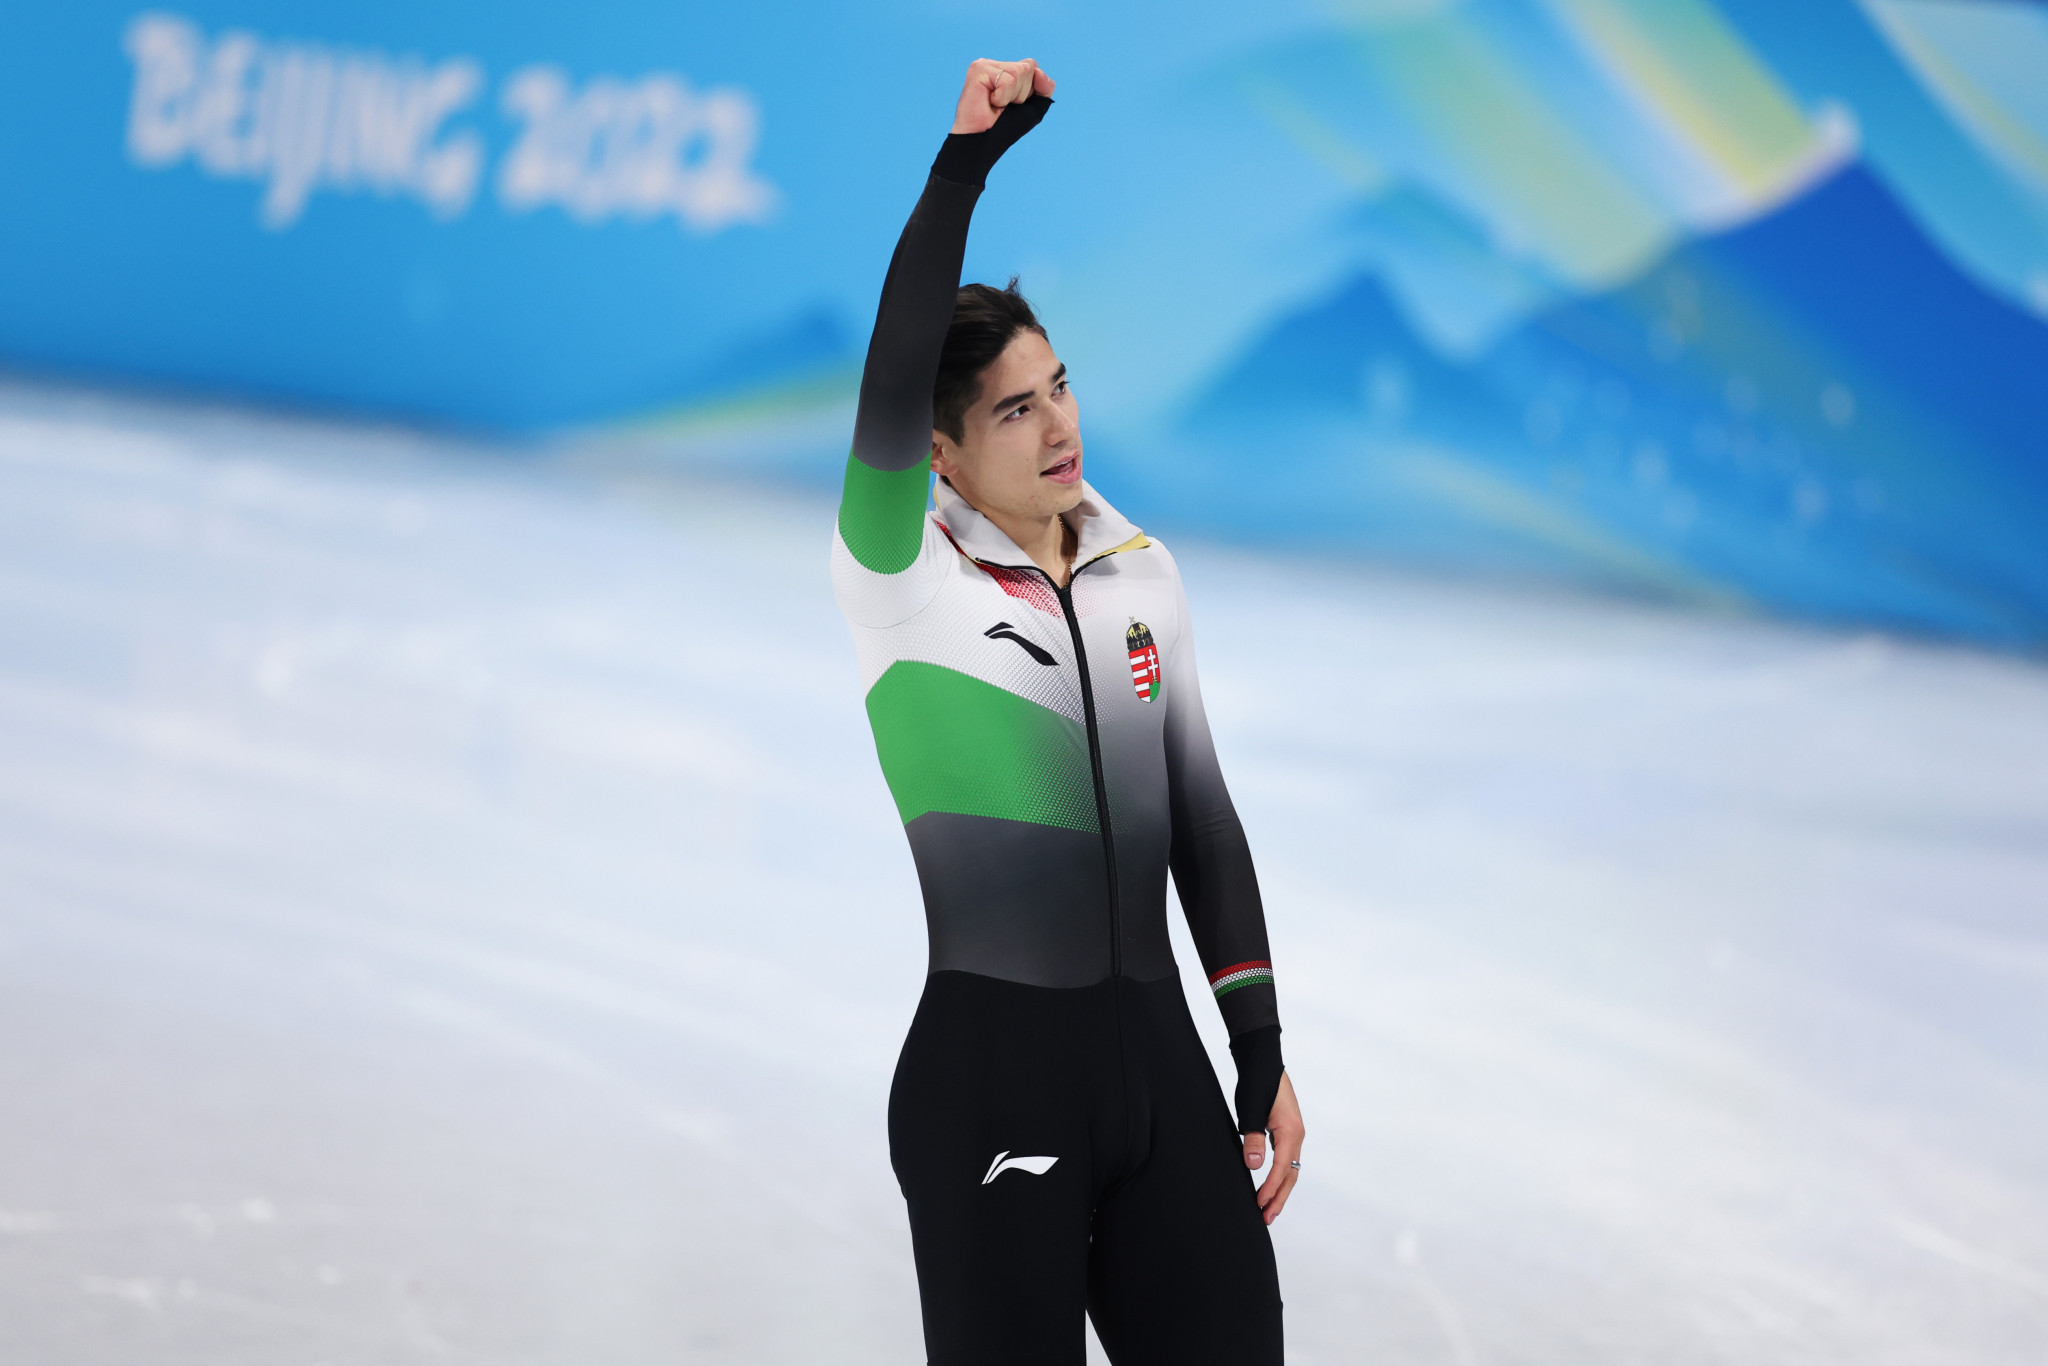 Shaoang Liu retained his overall title at the World Short Track Speed Skating Championships ©Getty Images